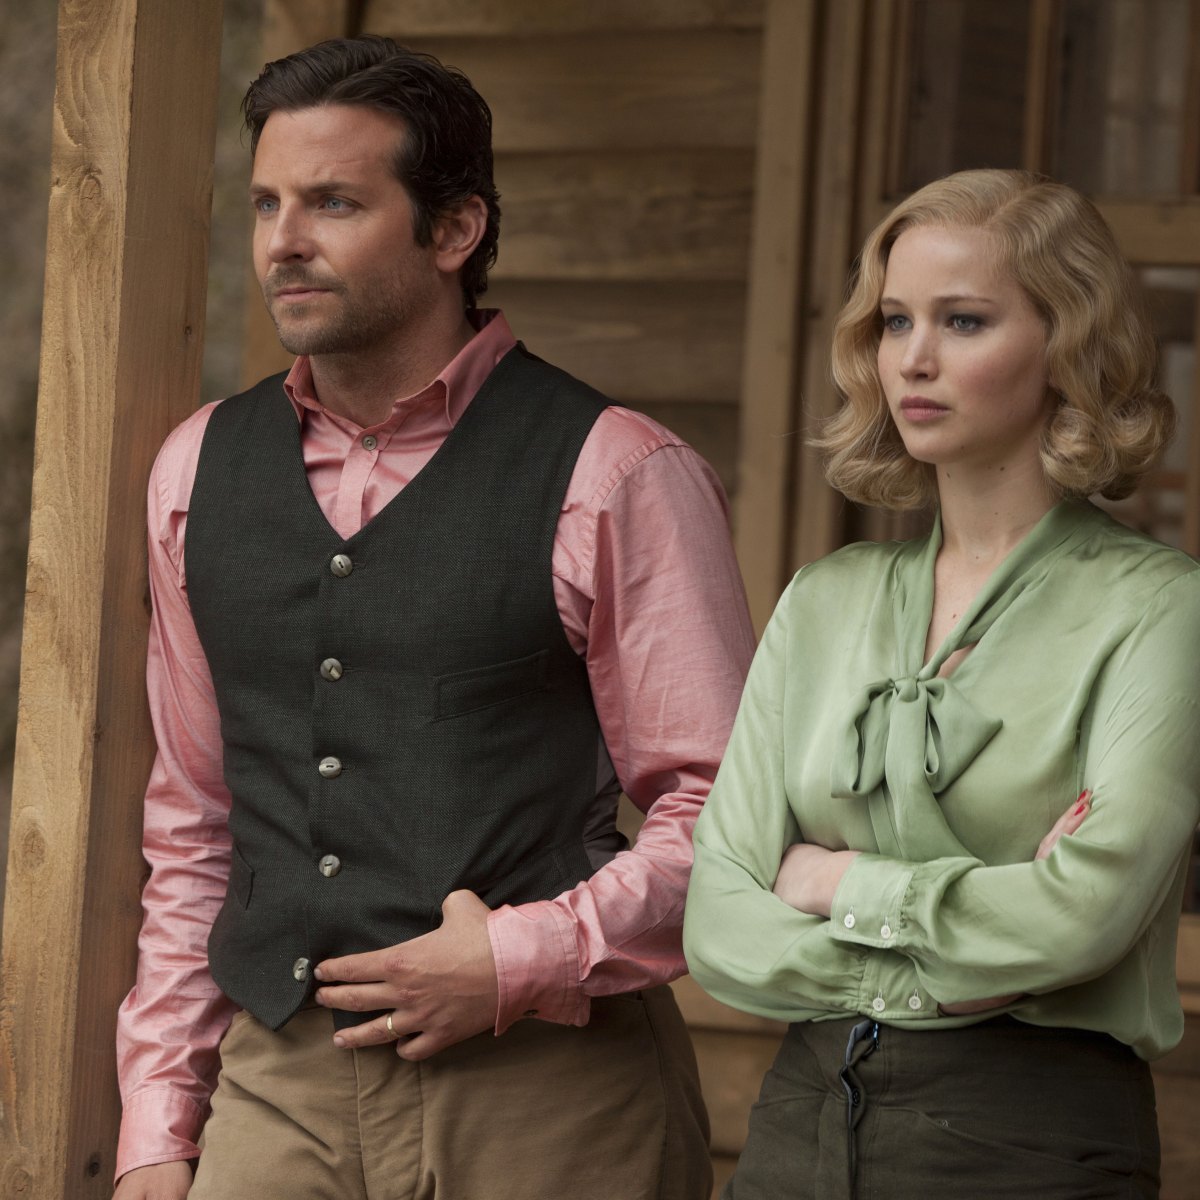 Bradley Cooper Movies: A Guide to His Most Noteworthy Films